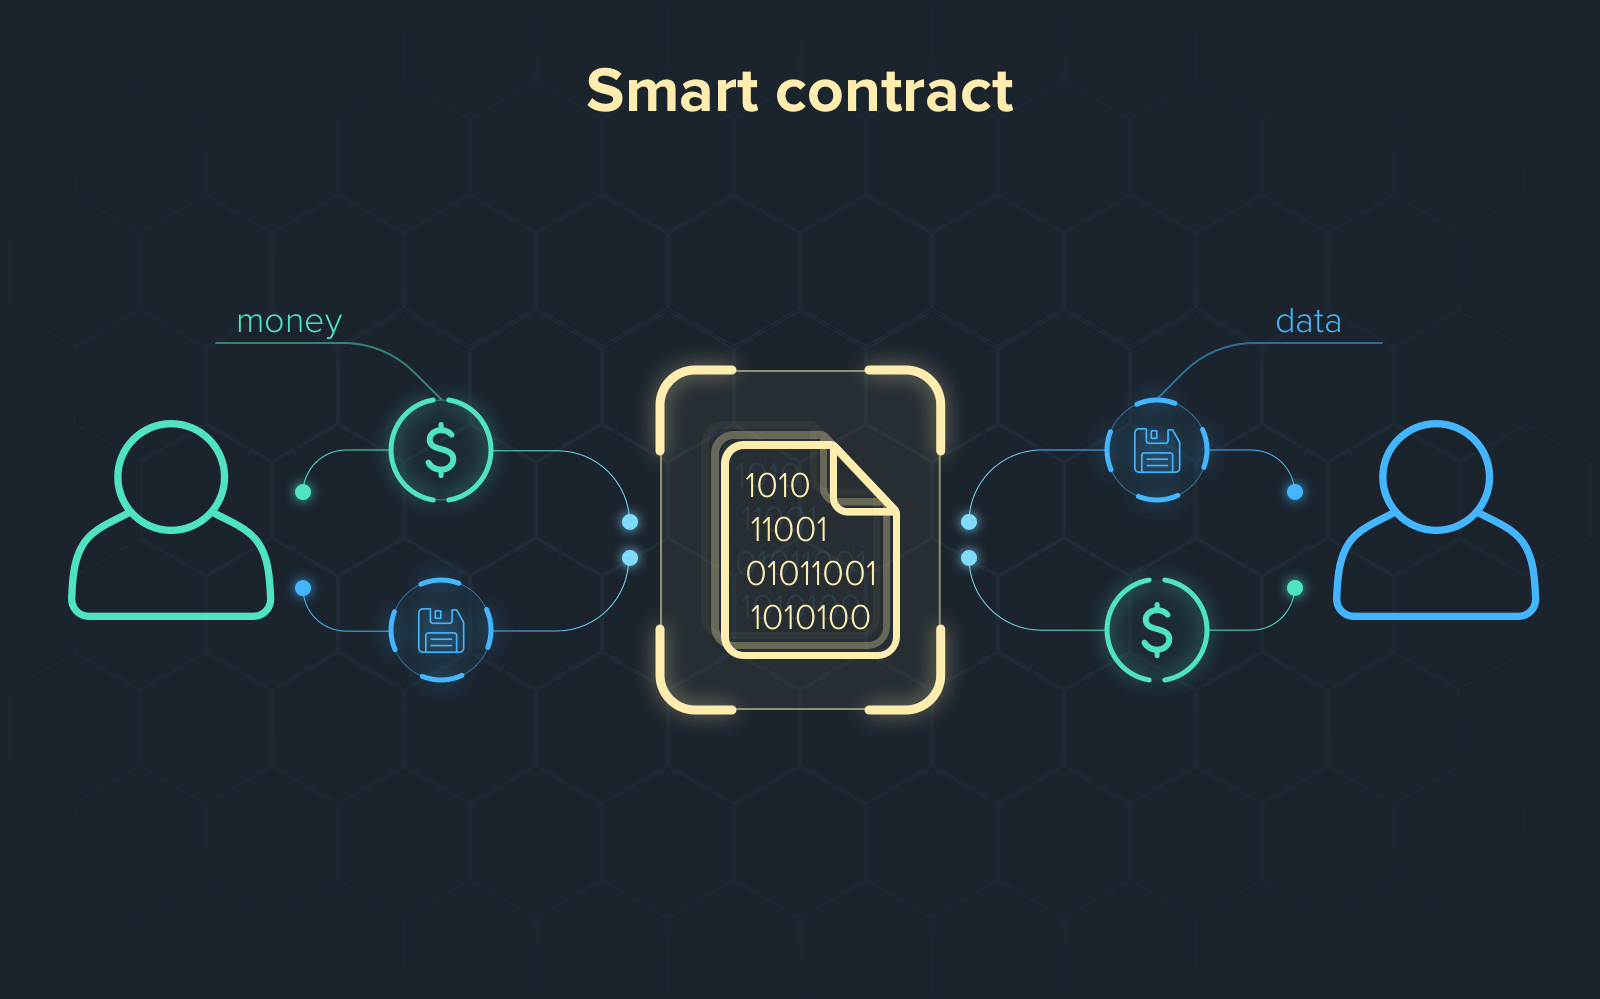 https://image.web.id/images/how-to-make-a-smart-contract-work-for-the-insuranc.png